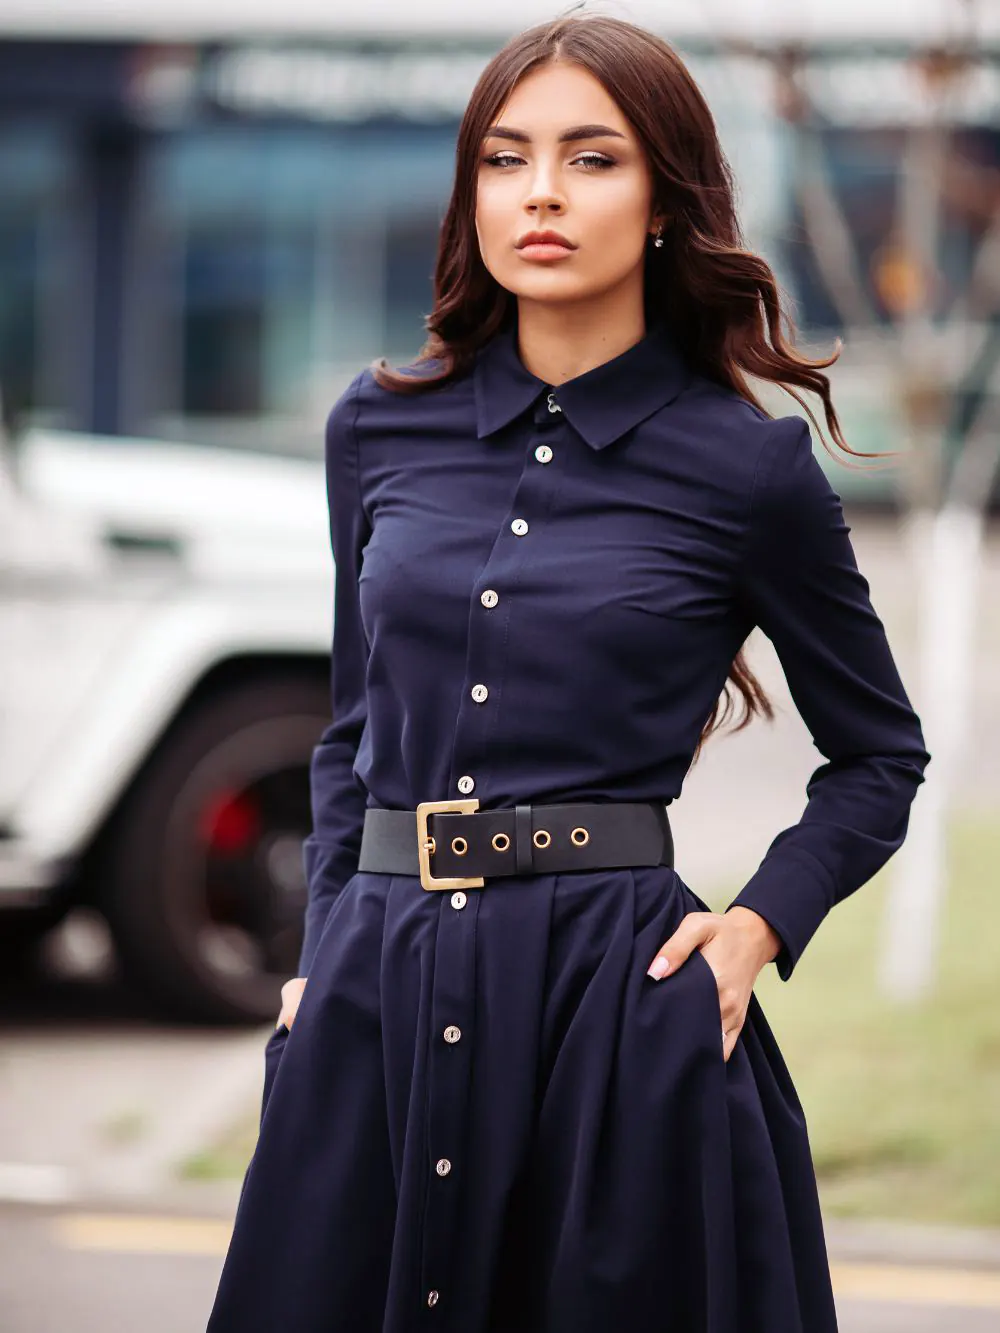 Black dress with pockets and belts